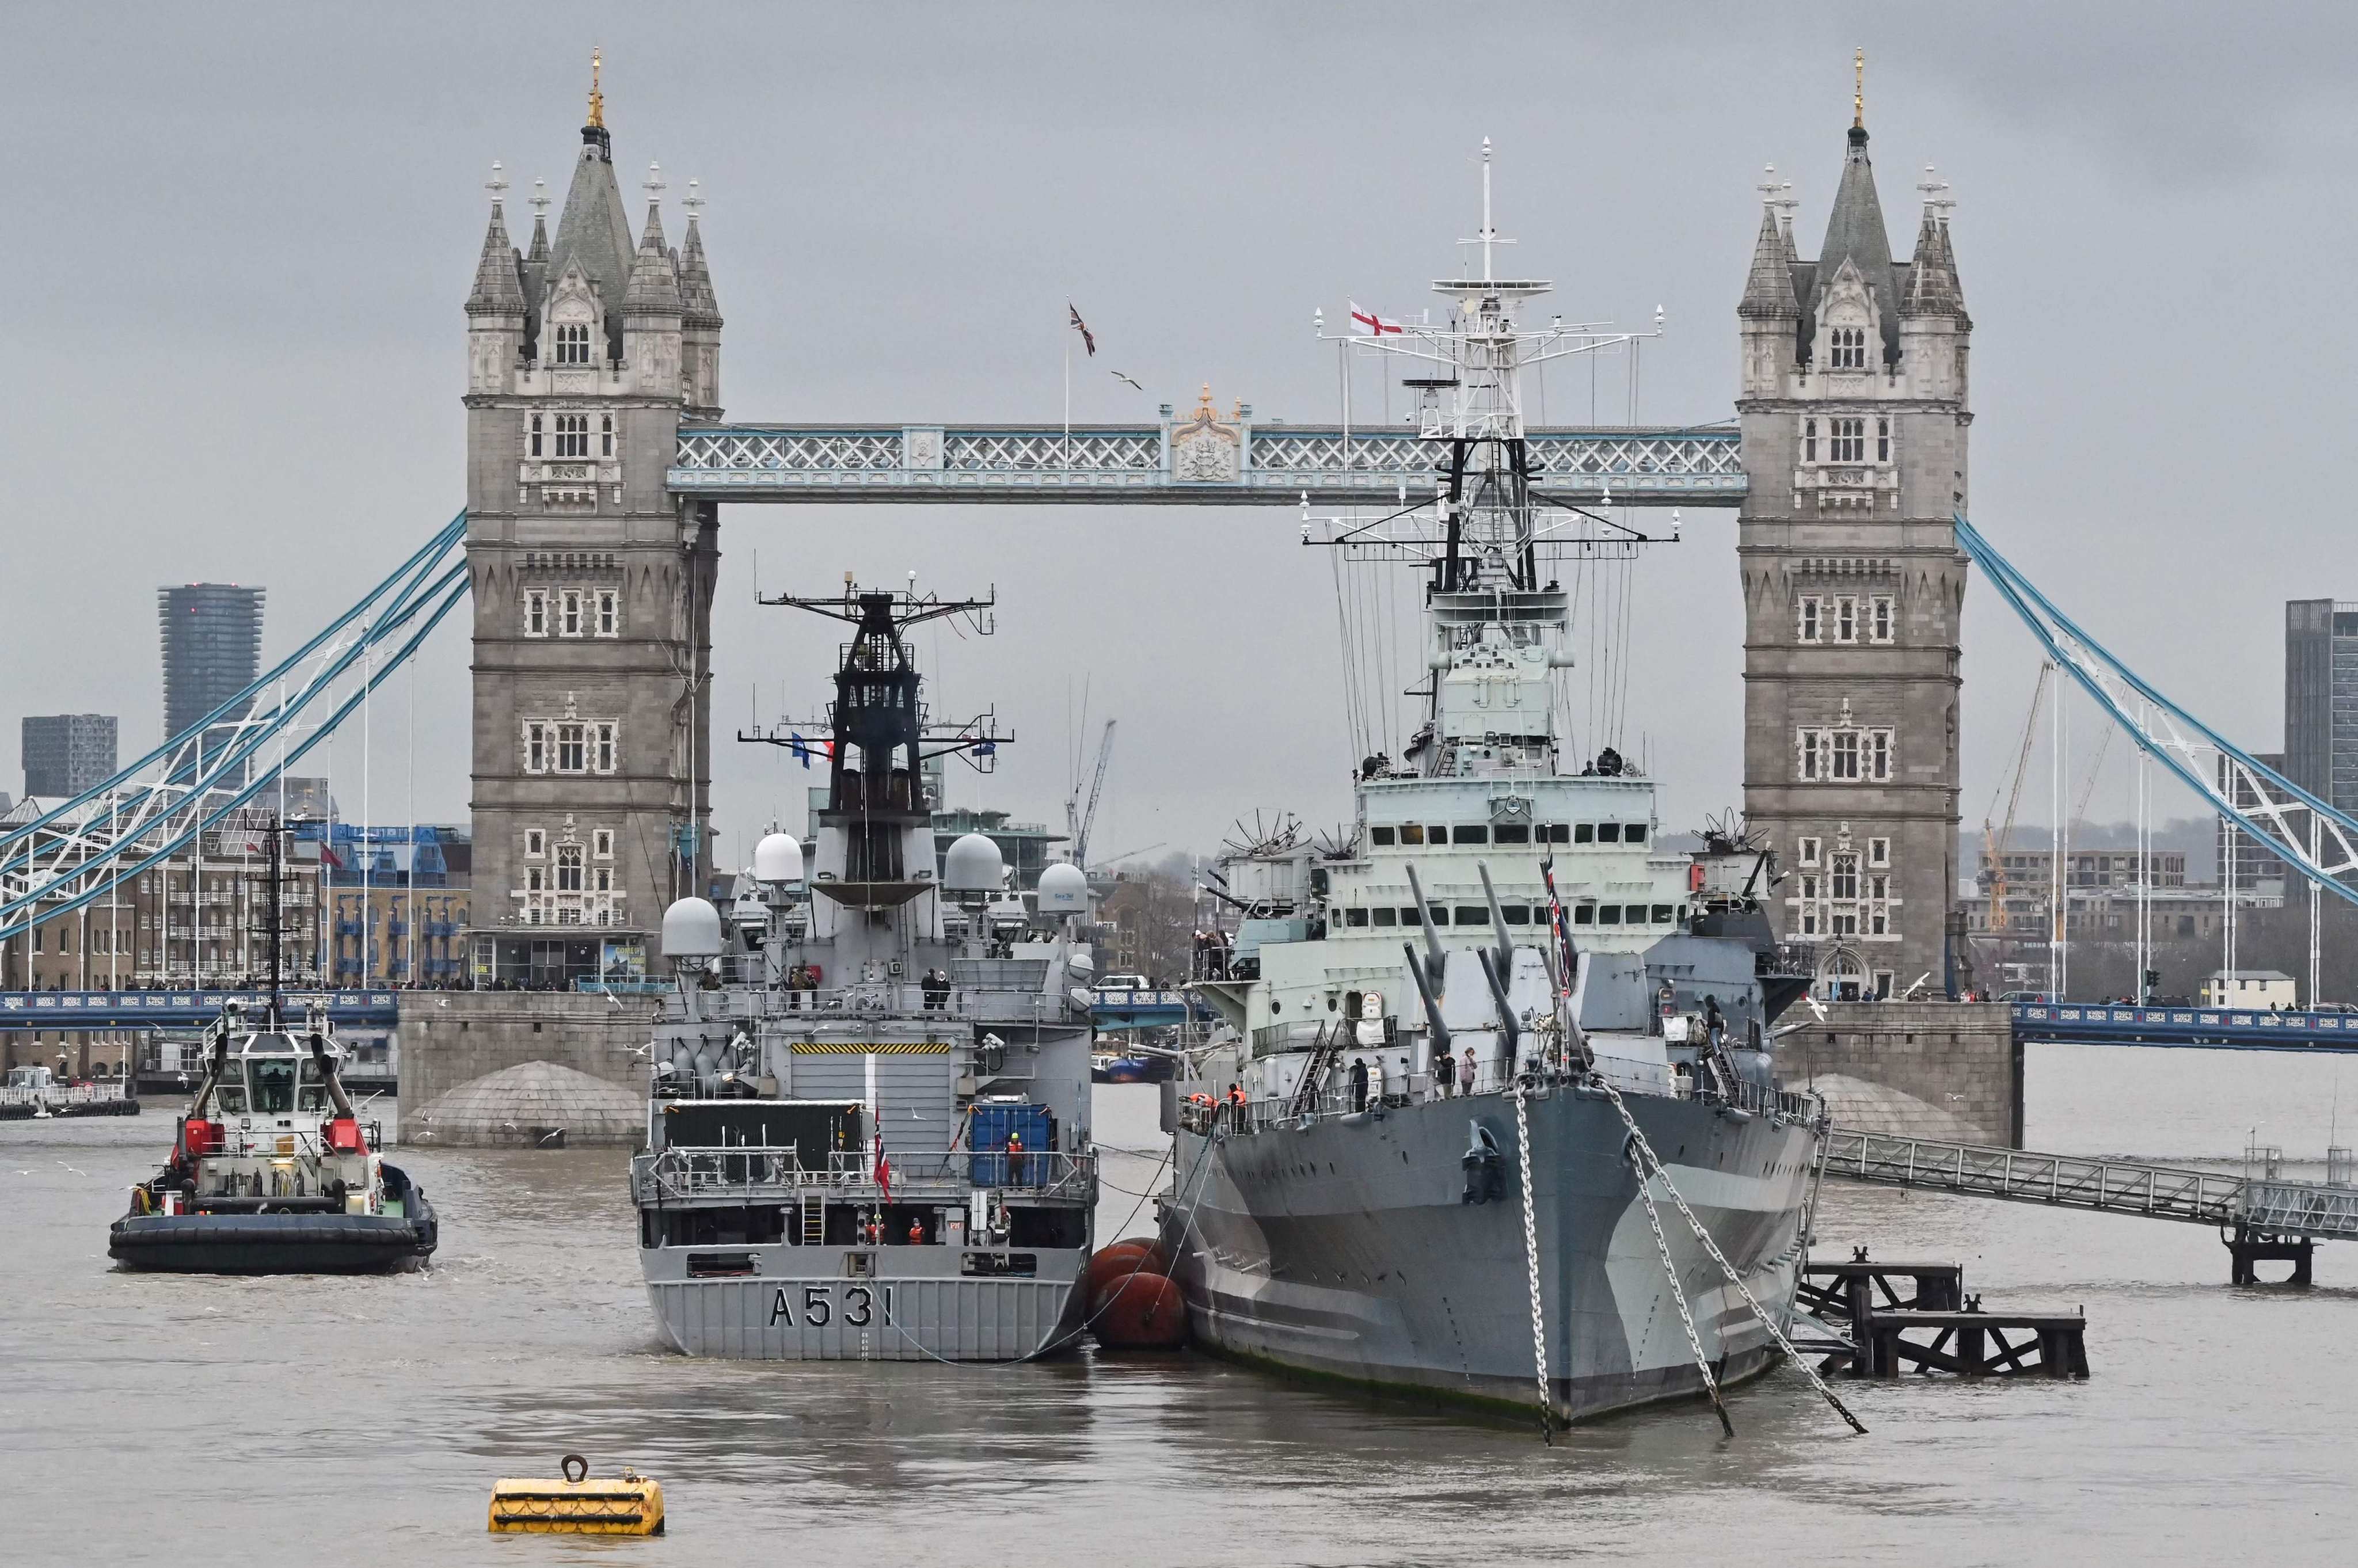 The Norwegian-flagged Nato warship A531 is moored next to HMS Belfast, a historic warship and museum, on the Thames in central London on February 23. Photo: AFP